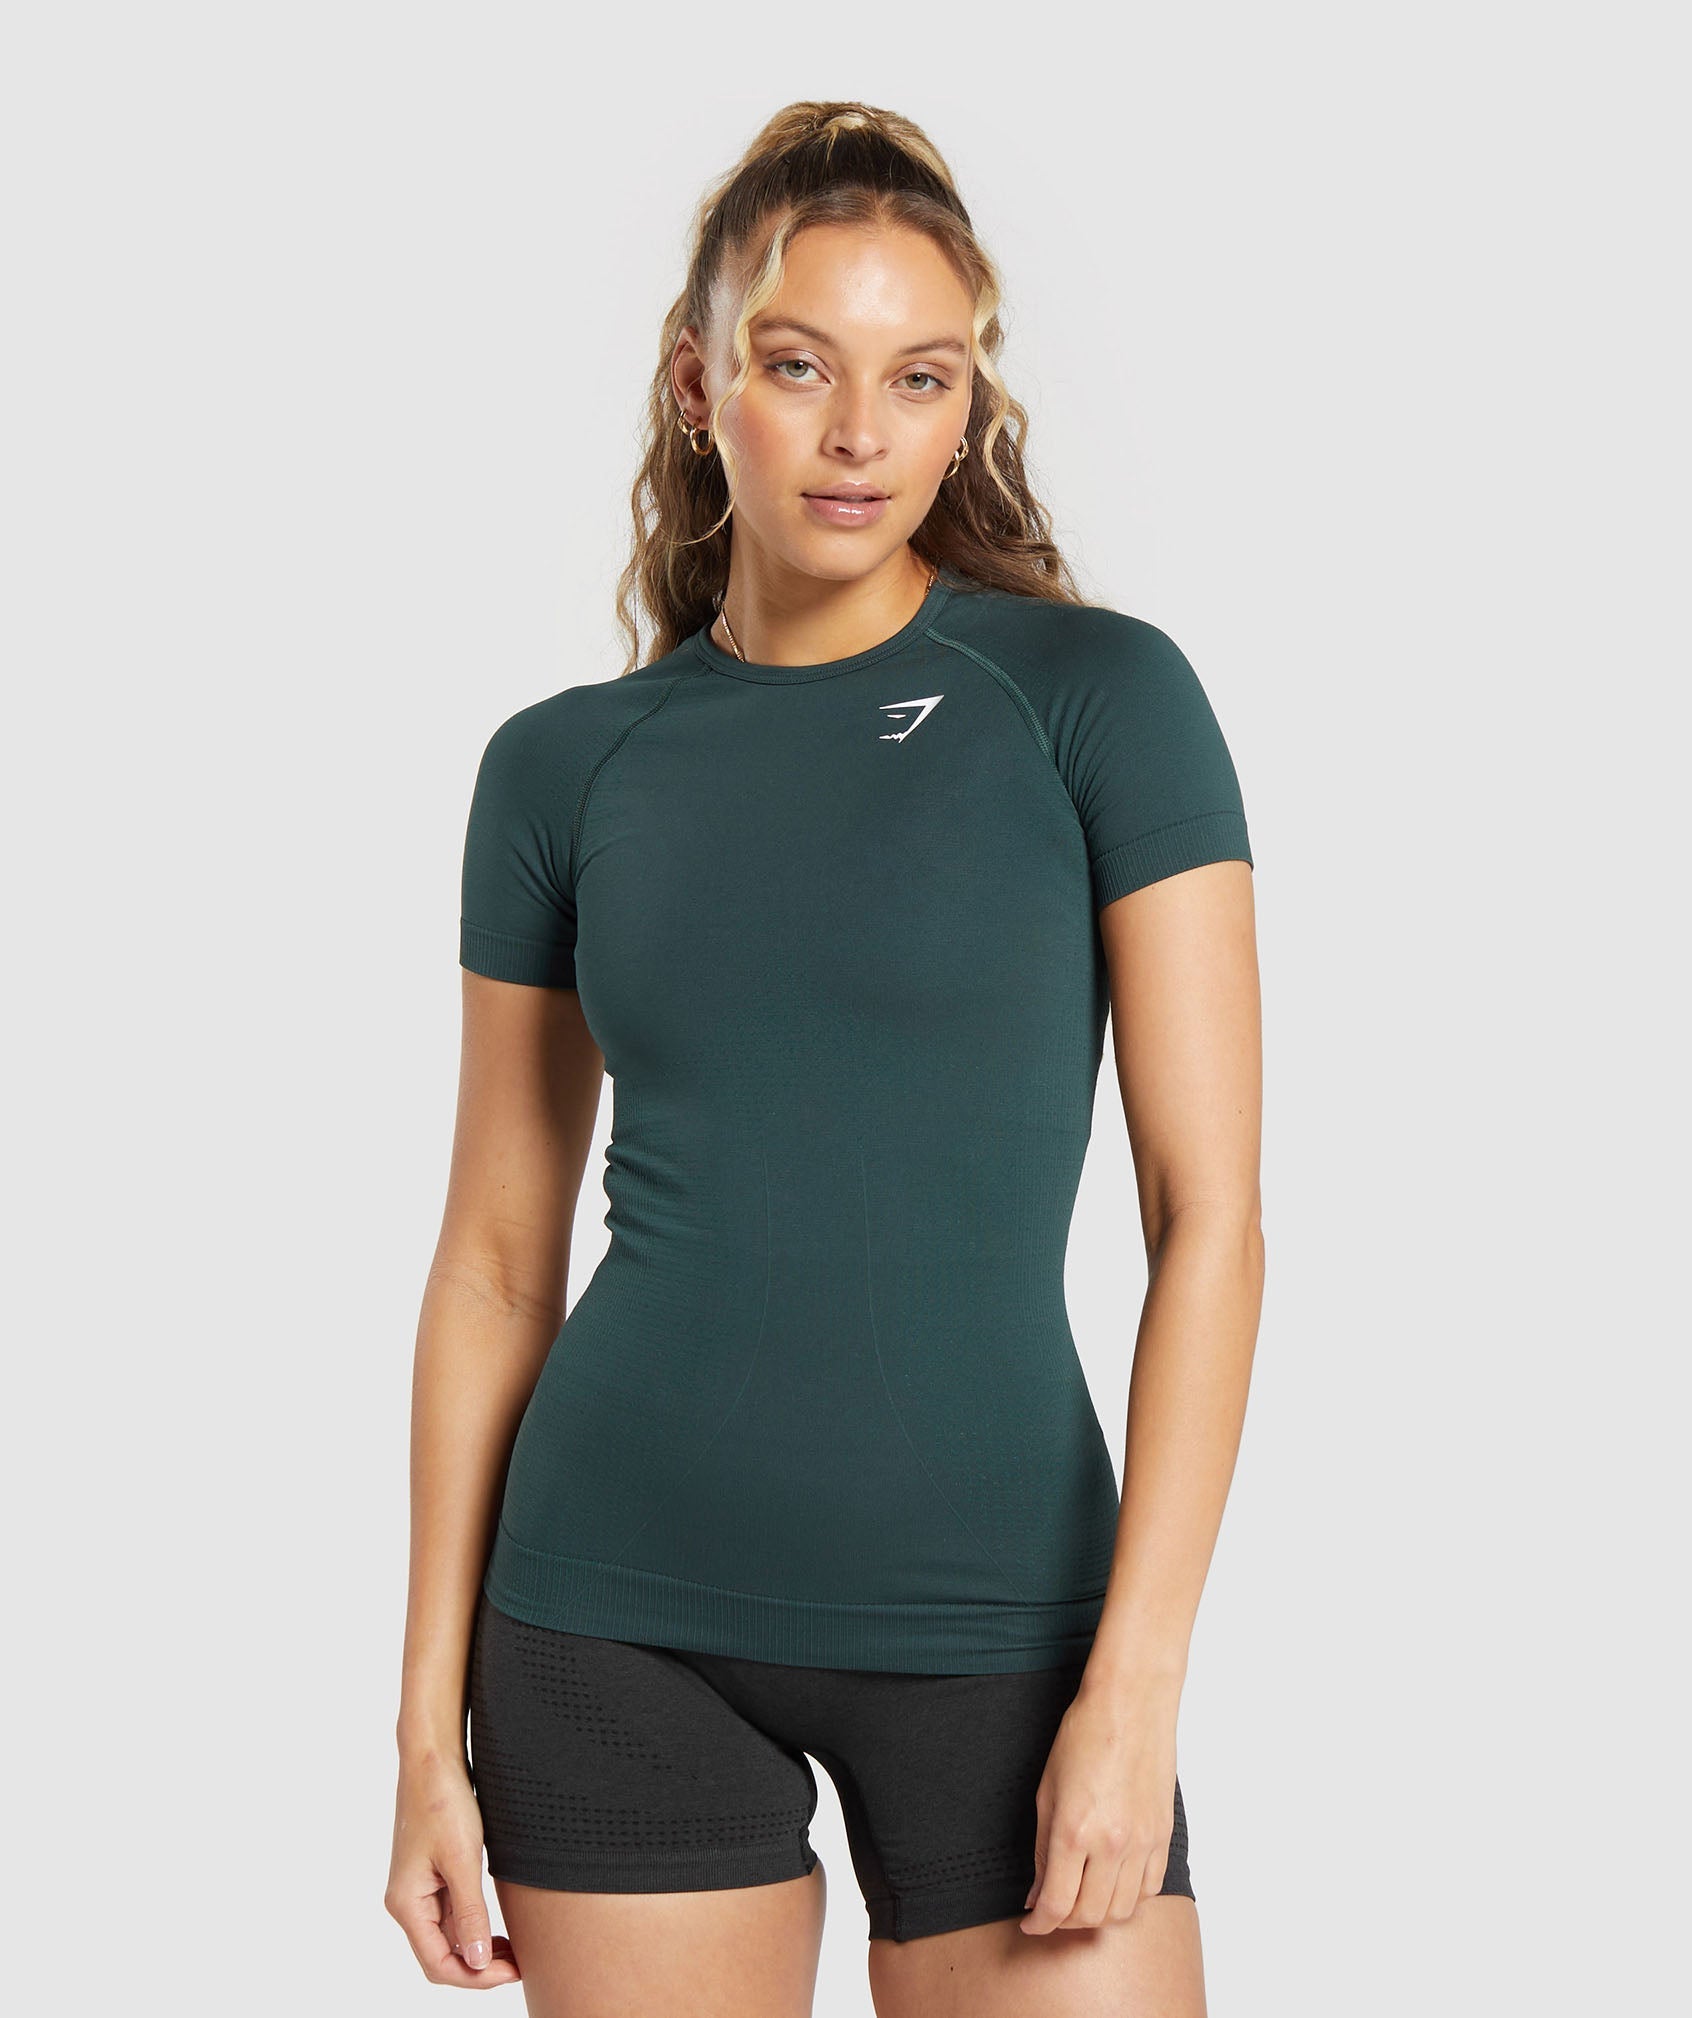 Vital Seamless 2.0 T-Shirt in {{variantColor} is out of stock